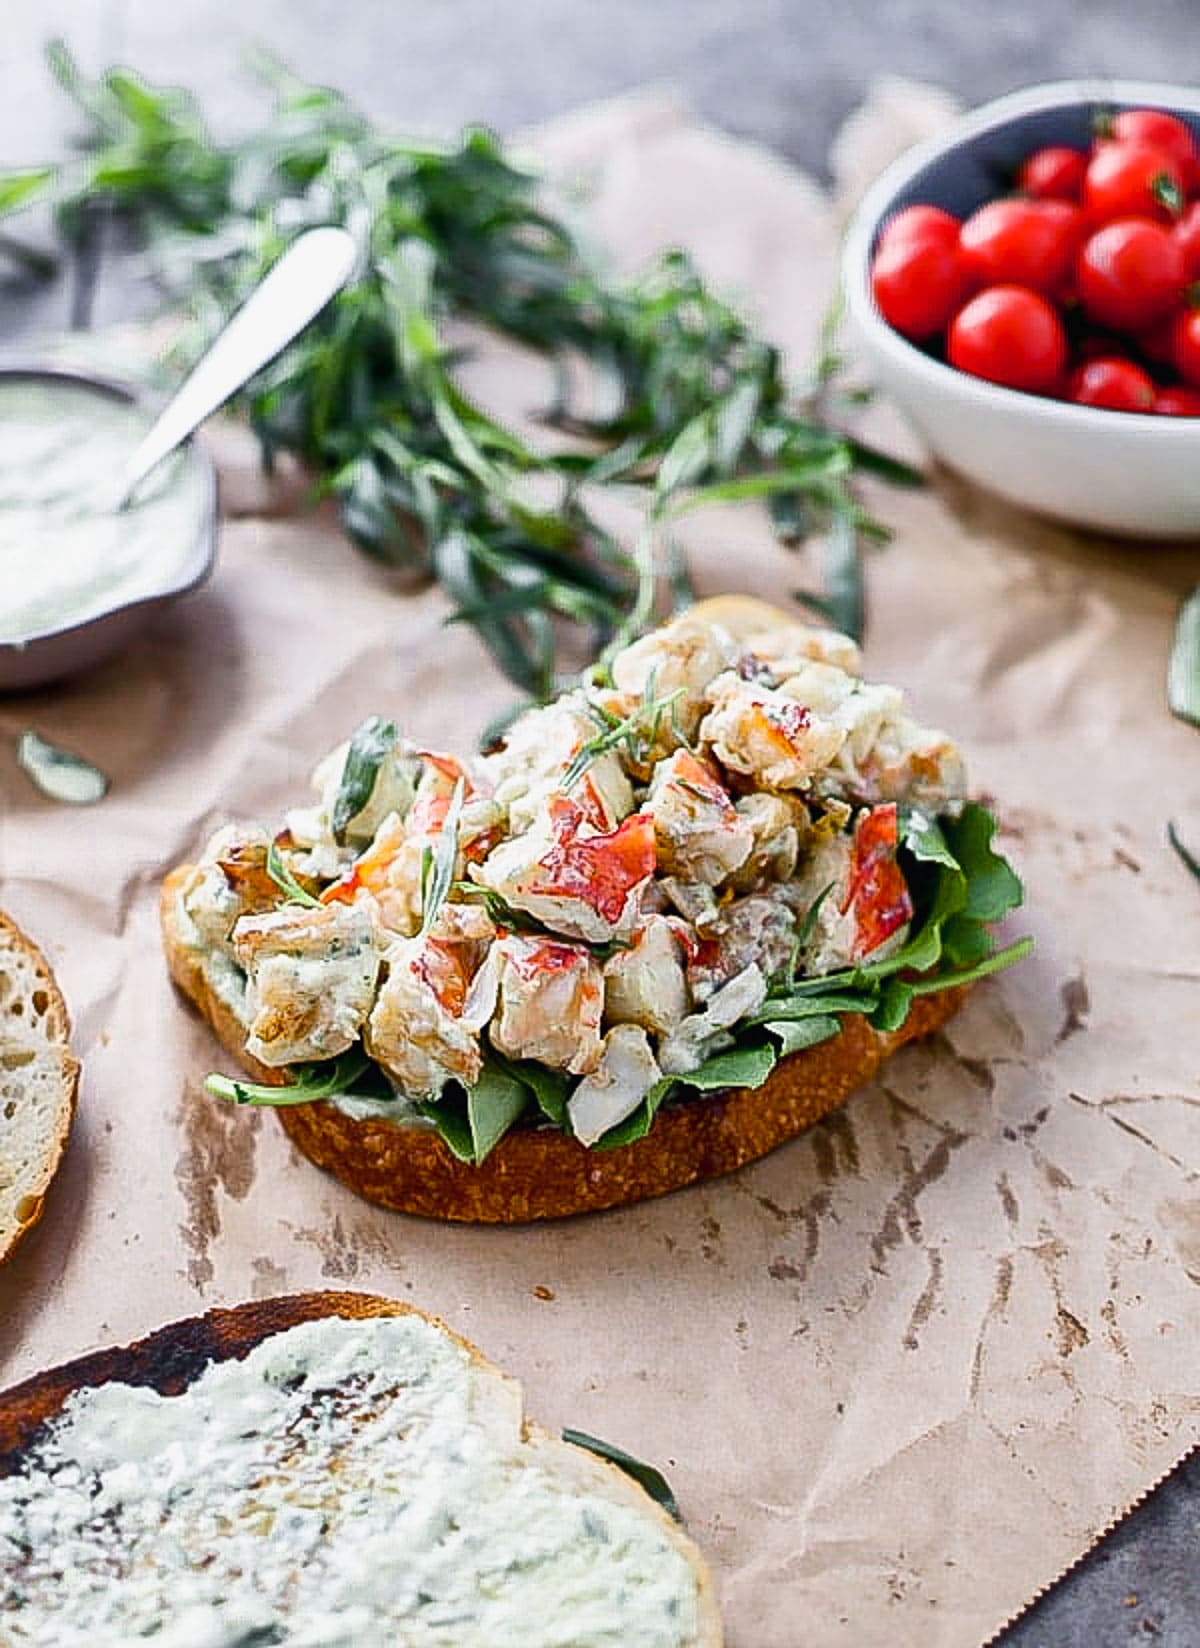 Our Green Goddess Lobster Sandwich Recipe is a dressed-up version of a classic lobster roll. We toss perfectly cooked buttery lobster with a quick green goddess dressing studded with fresh tarragon, basil, and green onion. We pile it high on toasted sourdough bread and top it off with peppery arugula and a squeeze of lemon.